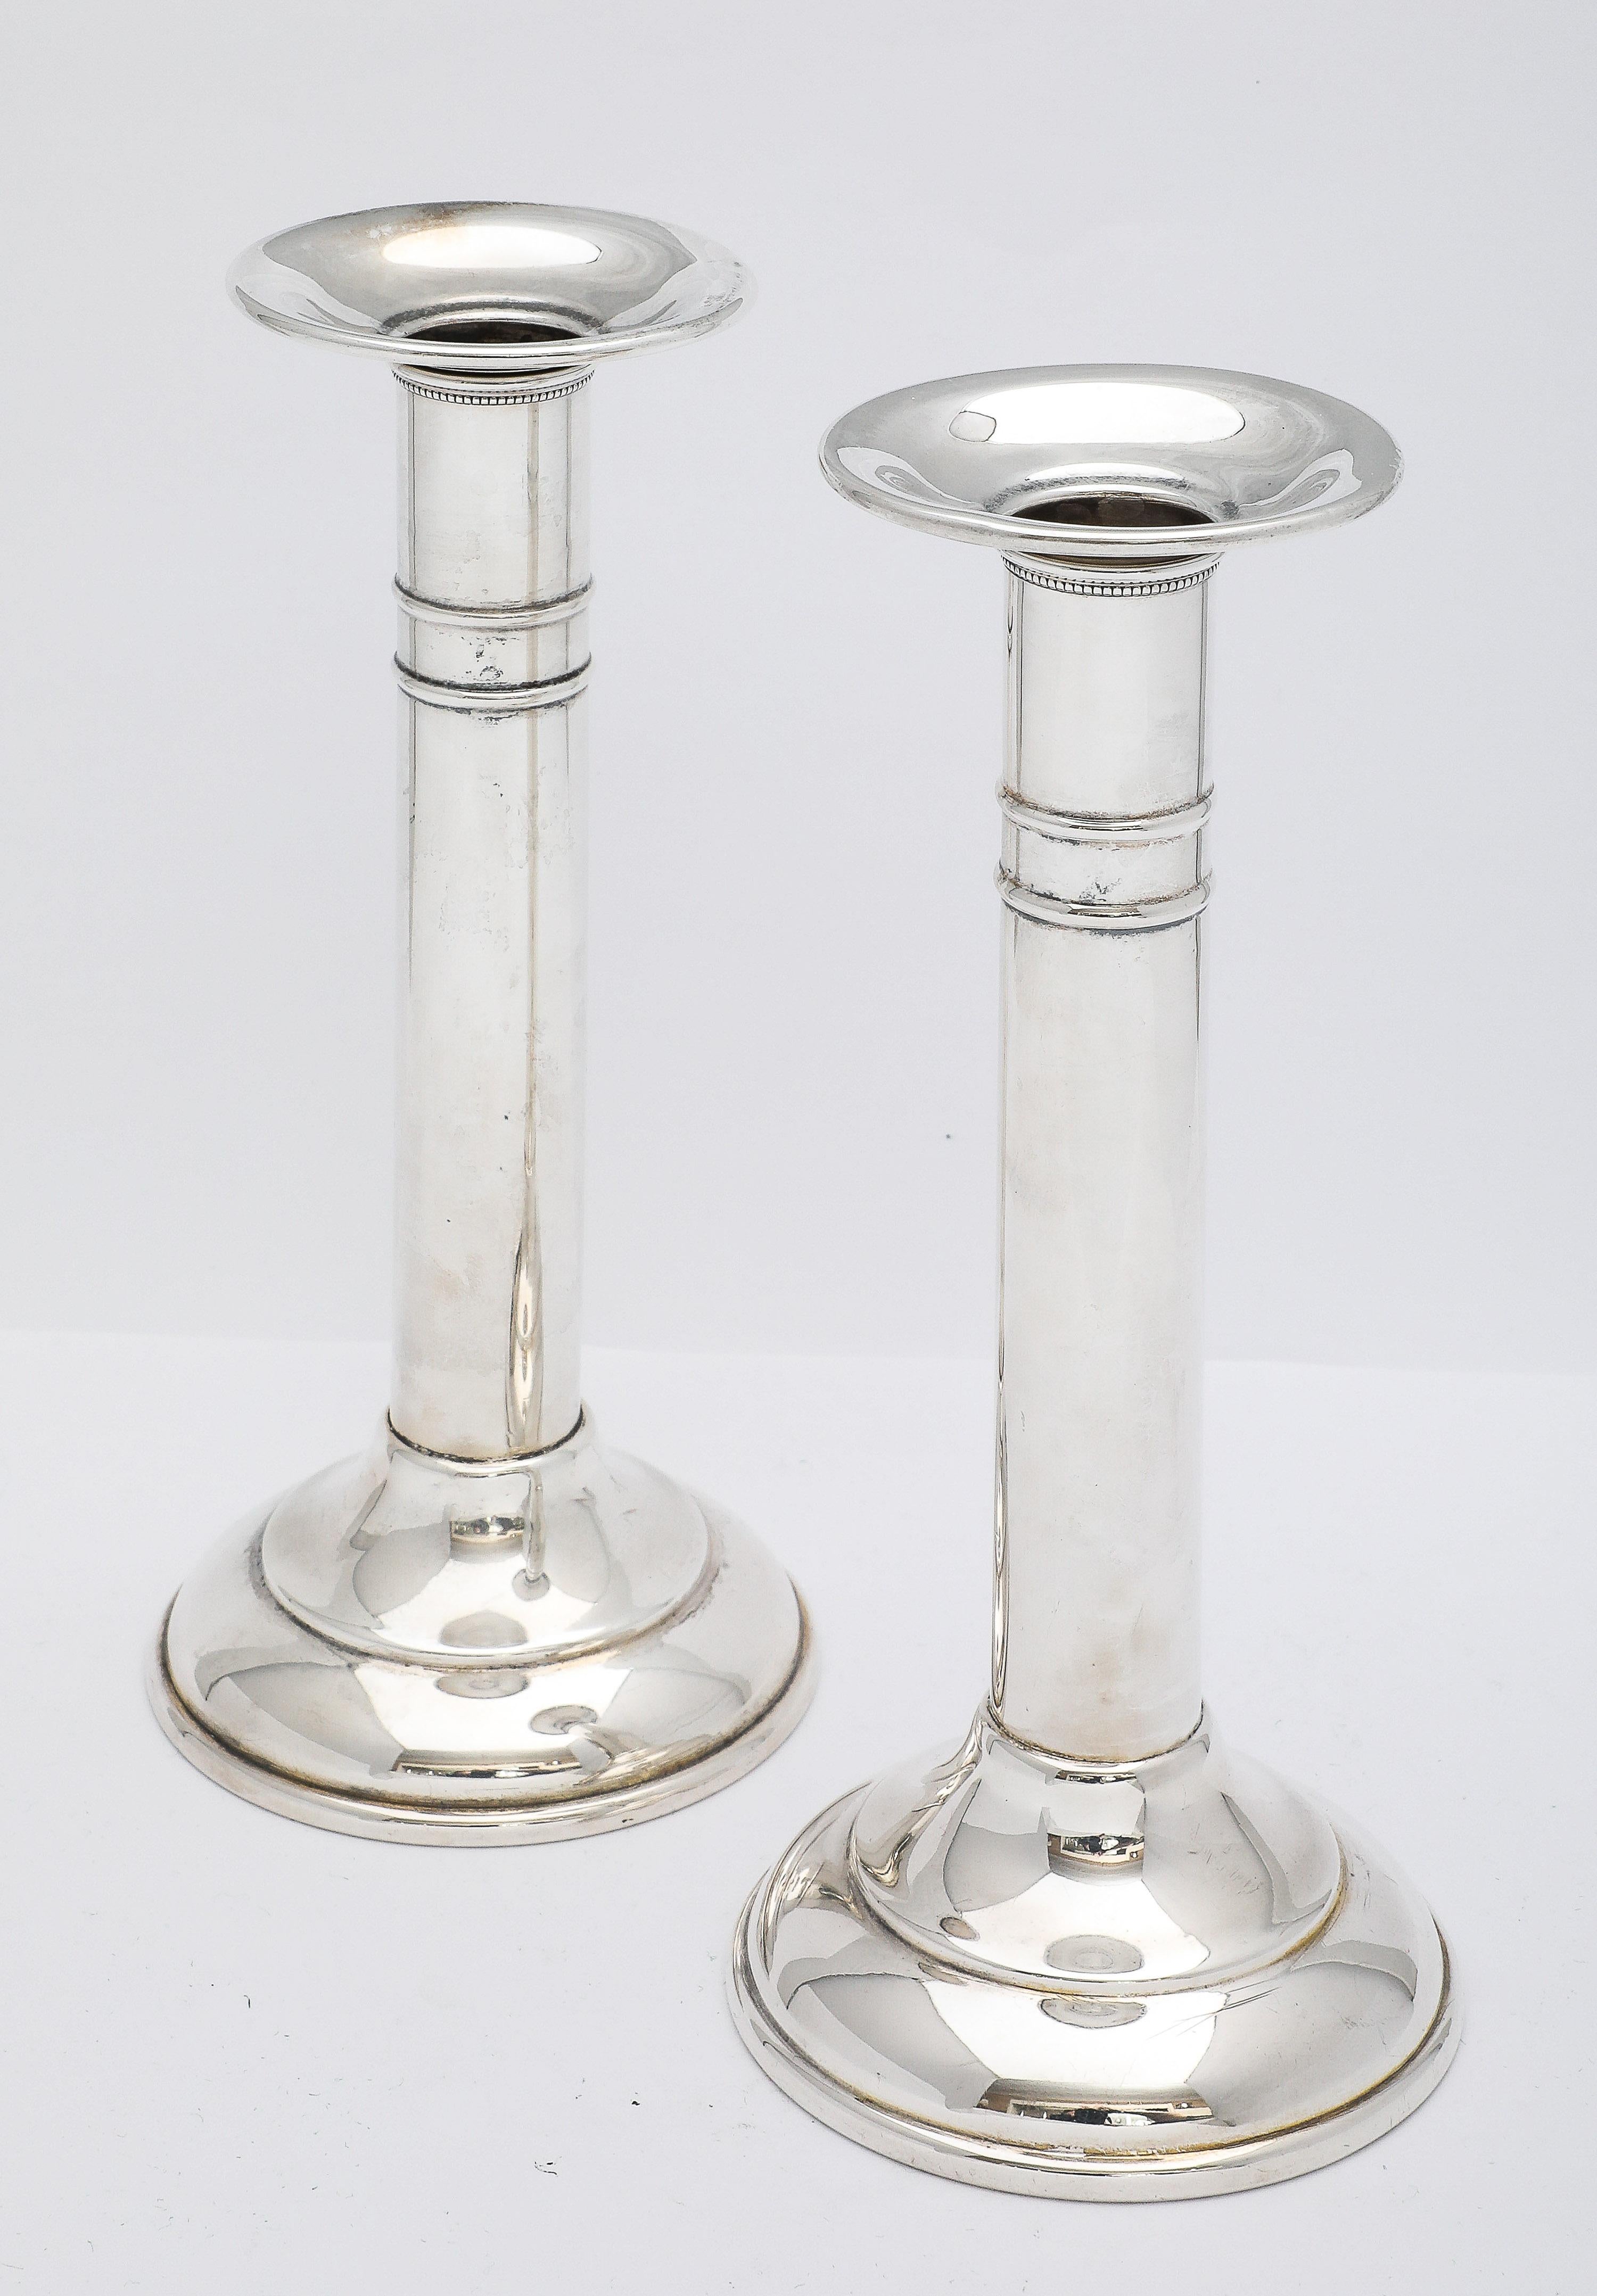 Pair of Edwardian Period Sterling Silver Candlesticks For Sale 4